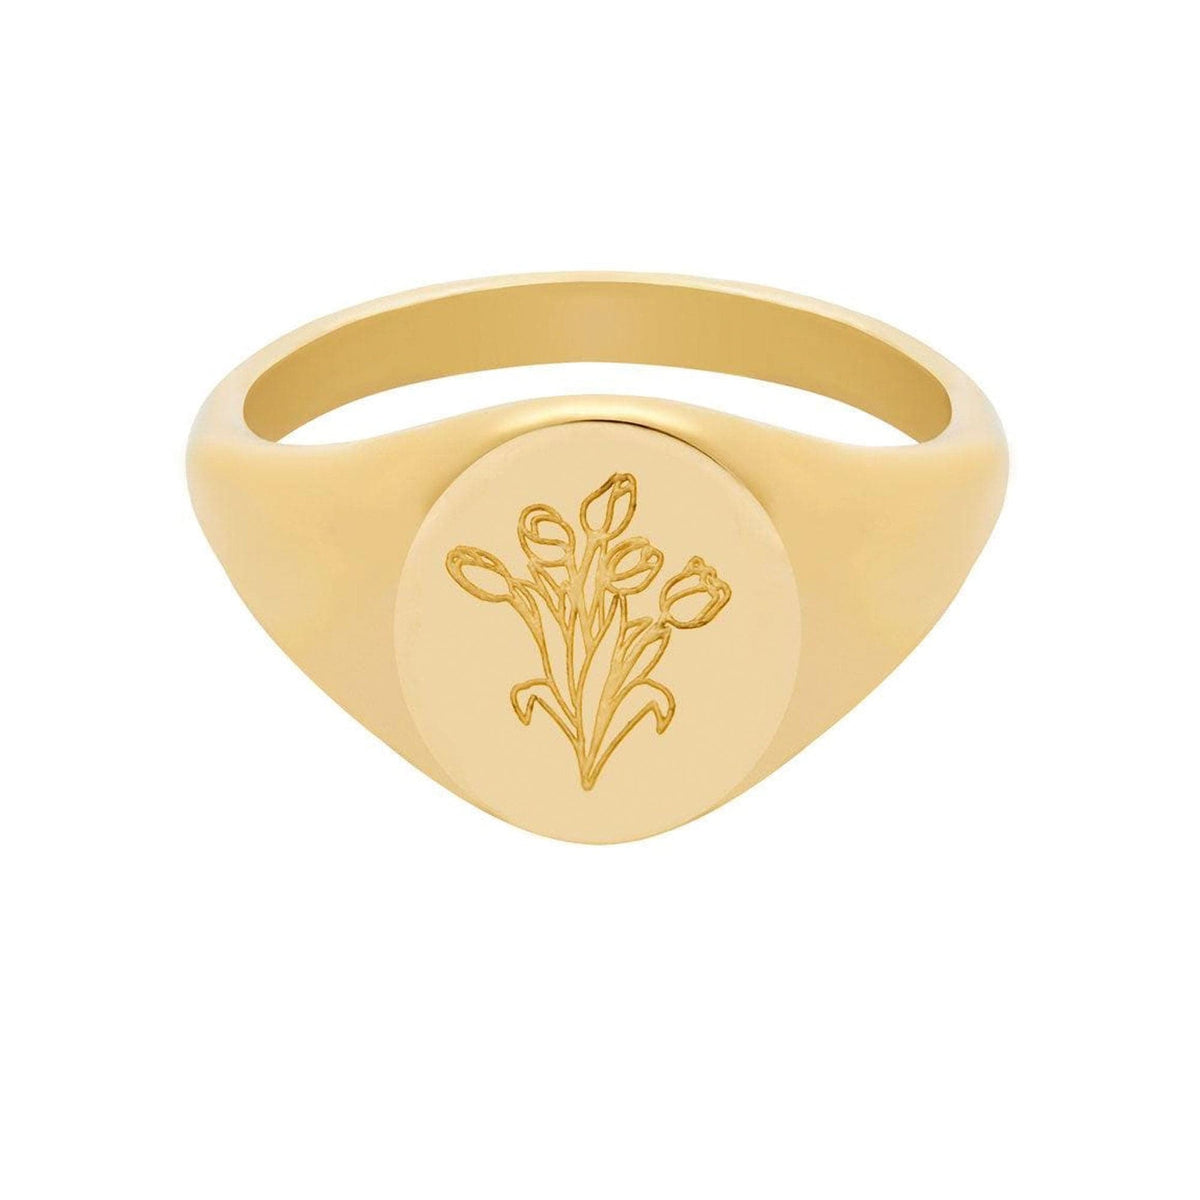 BohoMoon Stainless Steel Tulips Signet Ring Gold / US 5 / UK J / EUR 49 (x small)